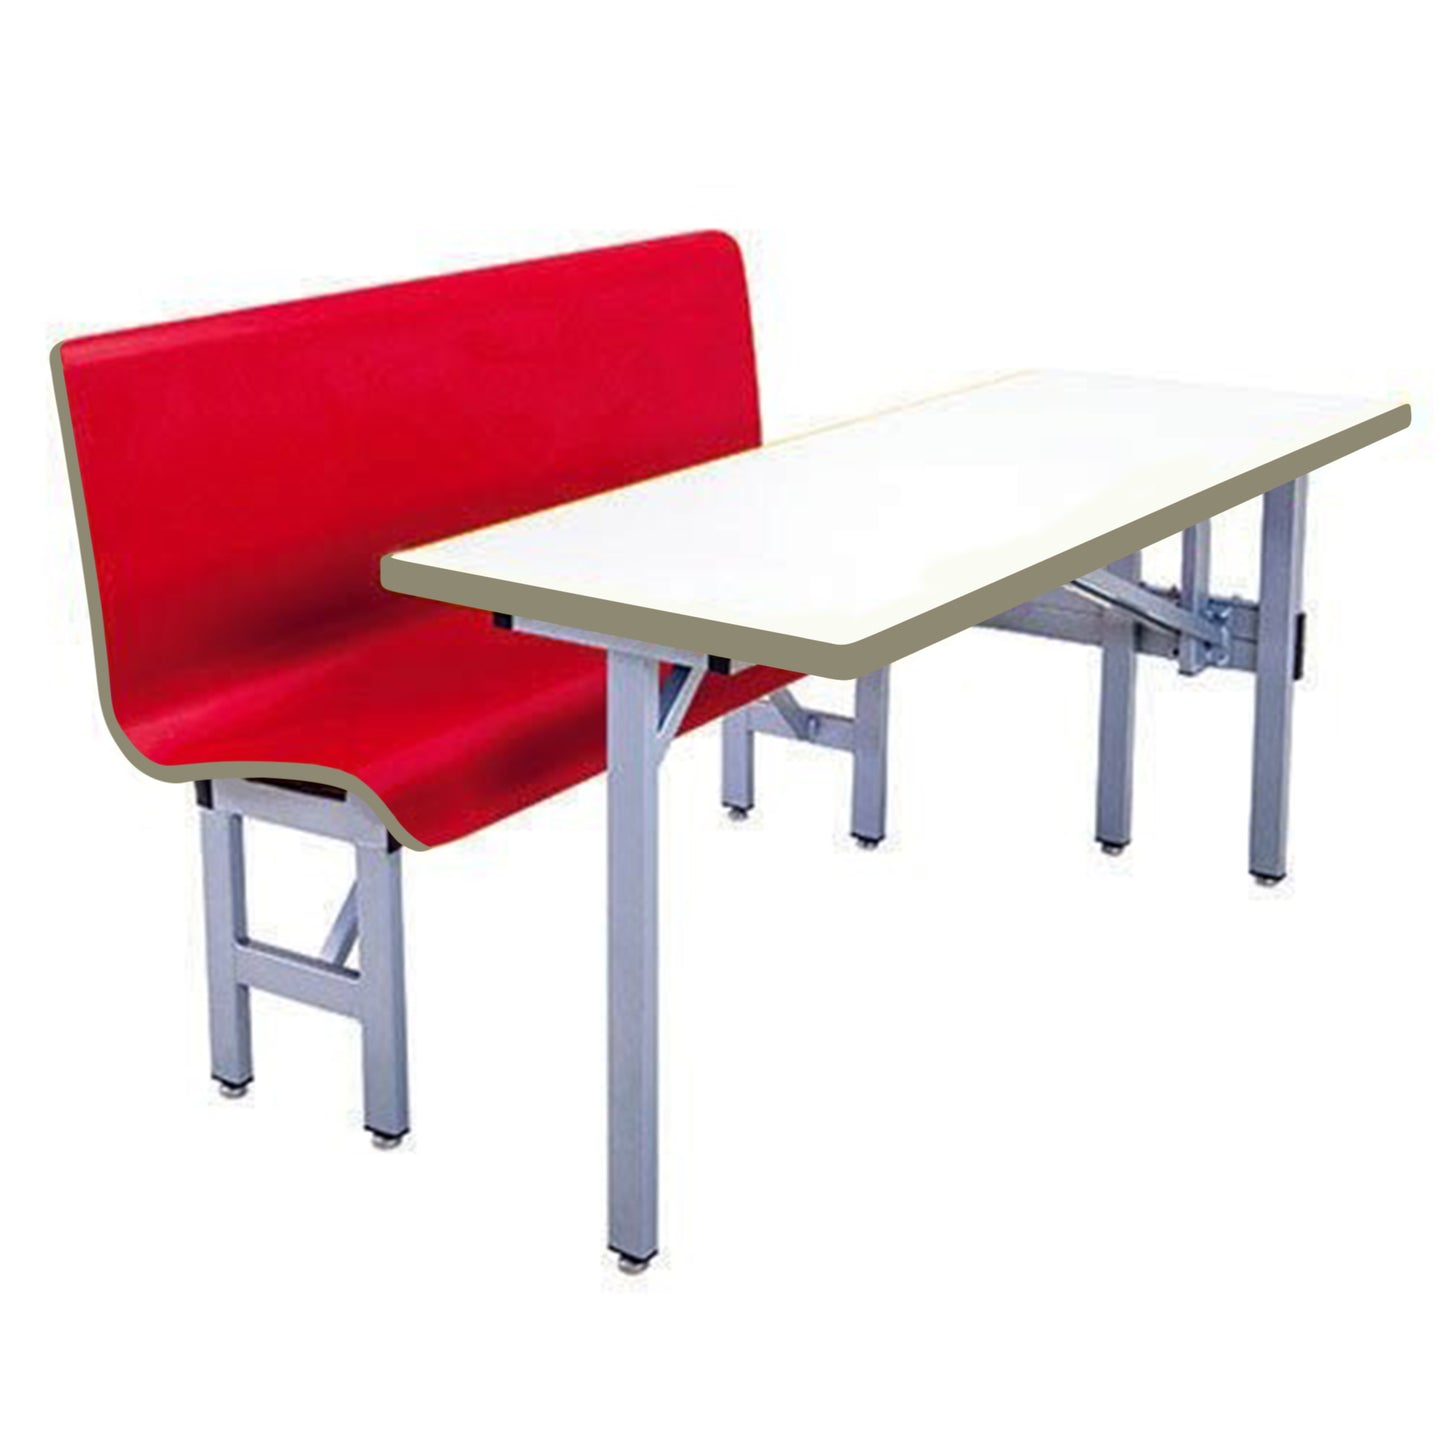 AmTab Booth Seating with Table - Half Package - 48"W x 48"L x 38"H  (AMT-MWHBSP244)